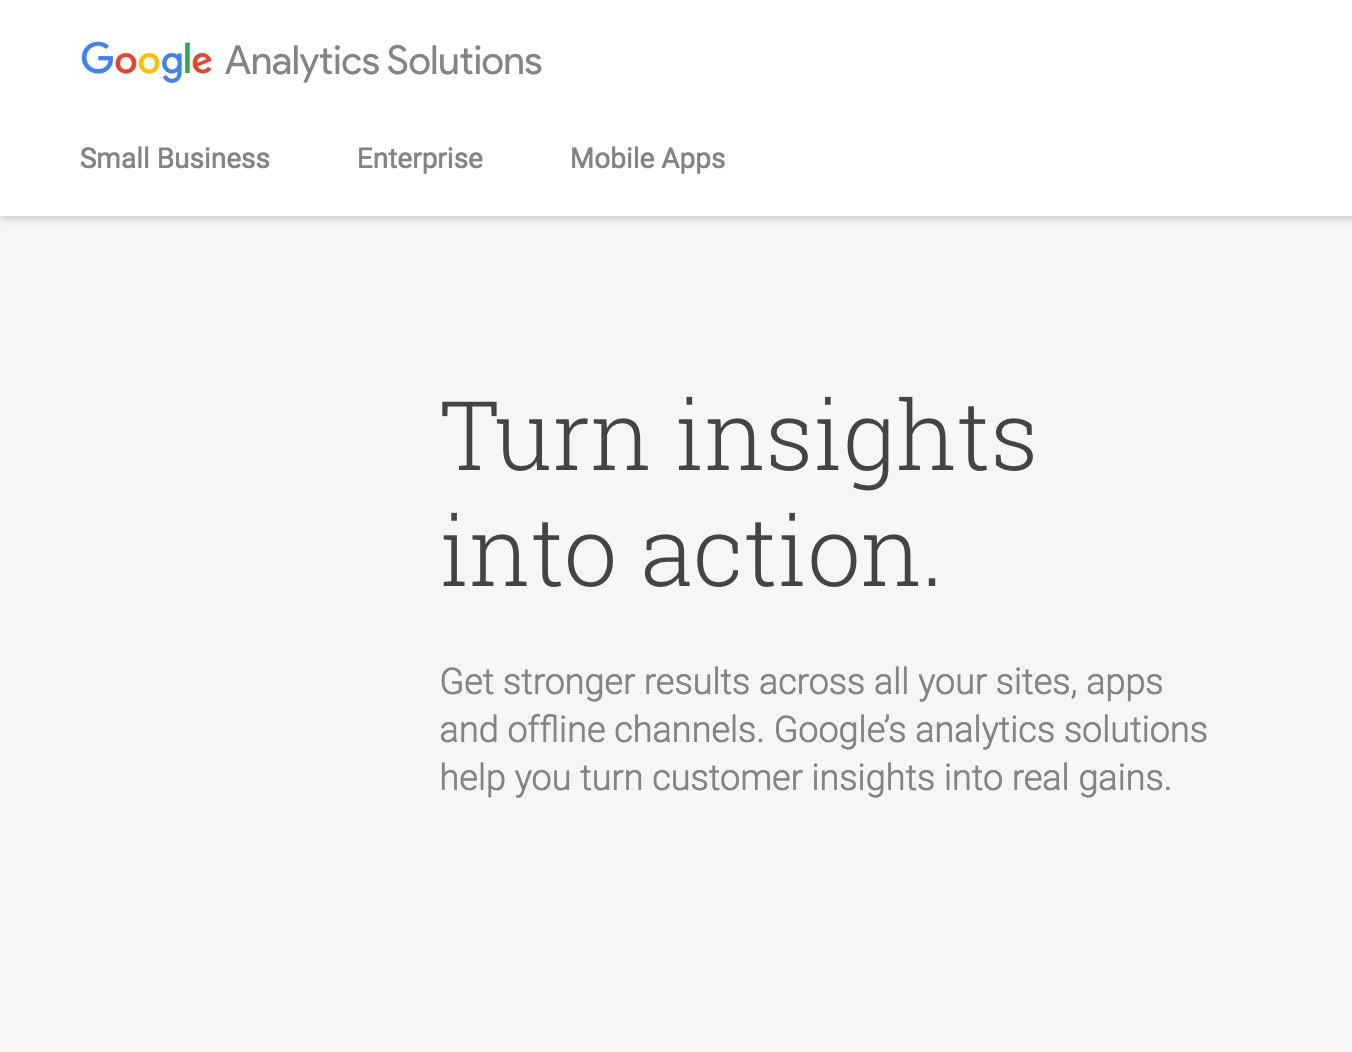 Measuring performance with Google Analytics reporting